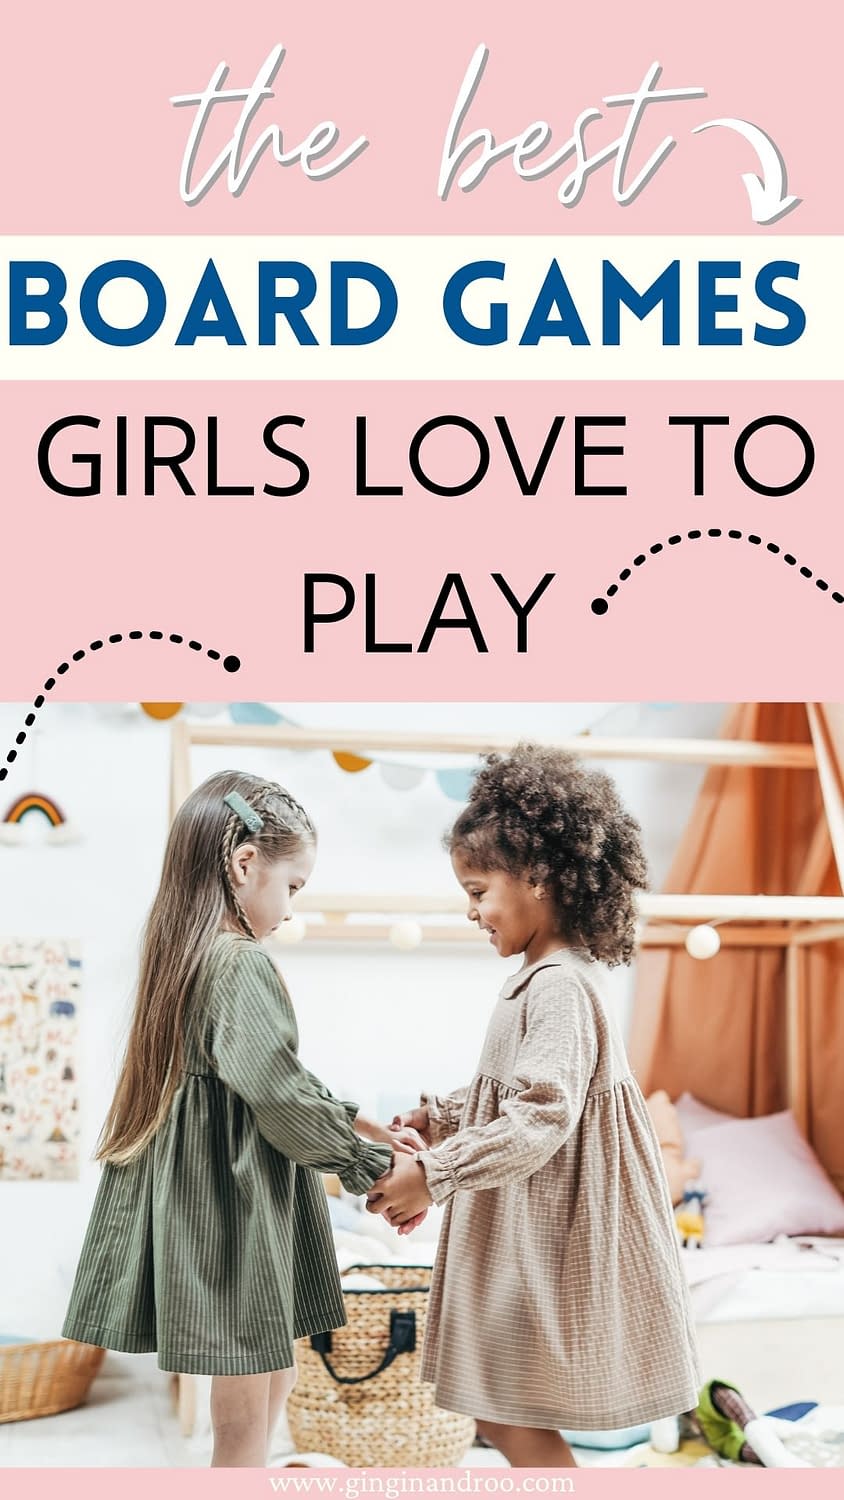 12 Fun Board Games Girls Aged 3-9 Love To Play by GinGin and Roo